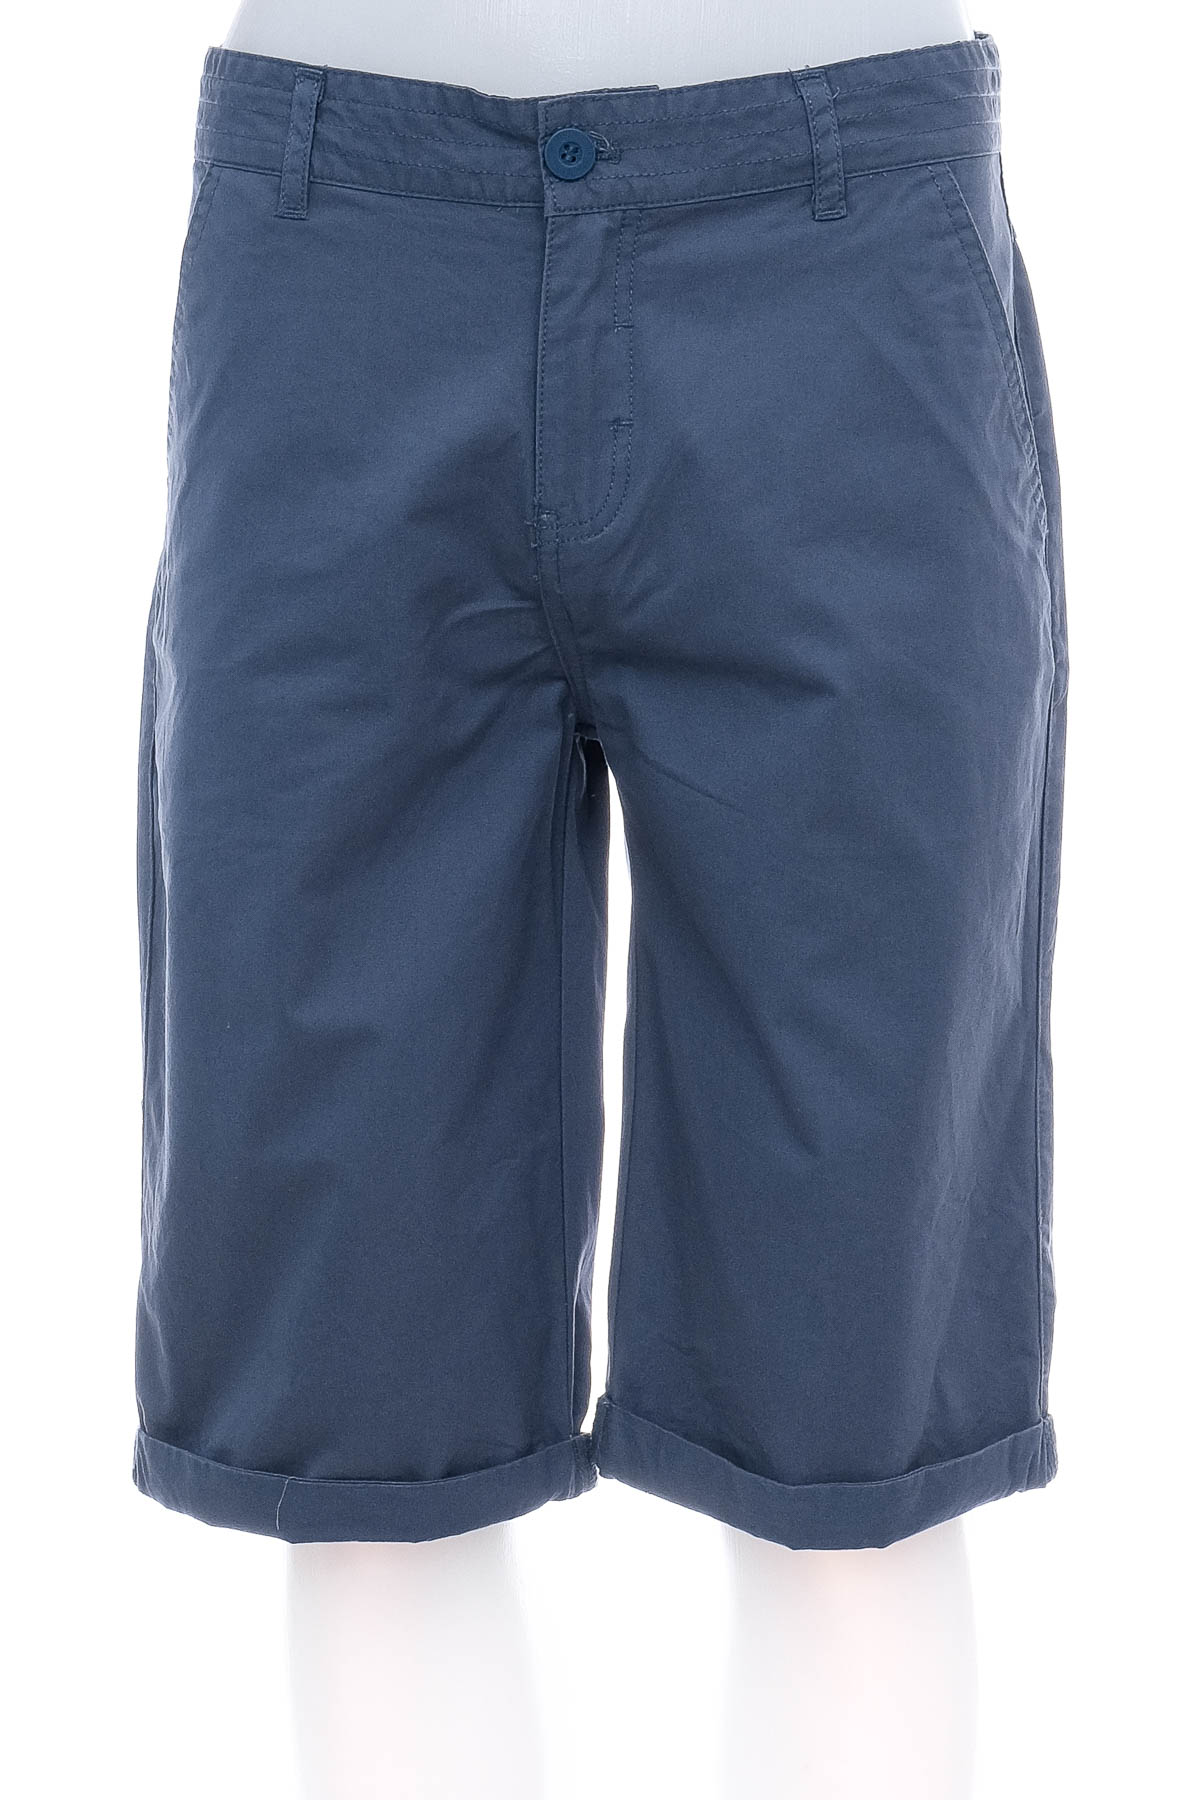 Shorts for boys - Chapter Young - 0